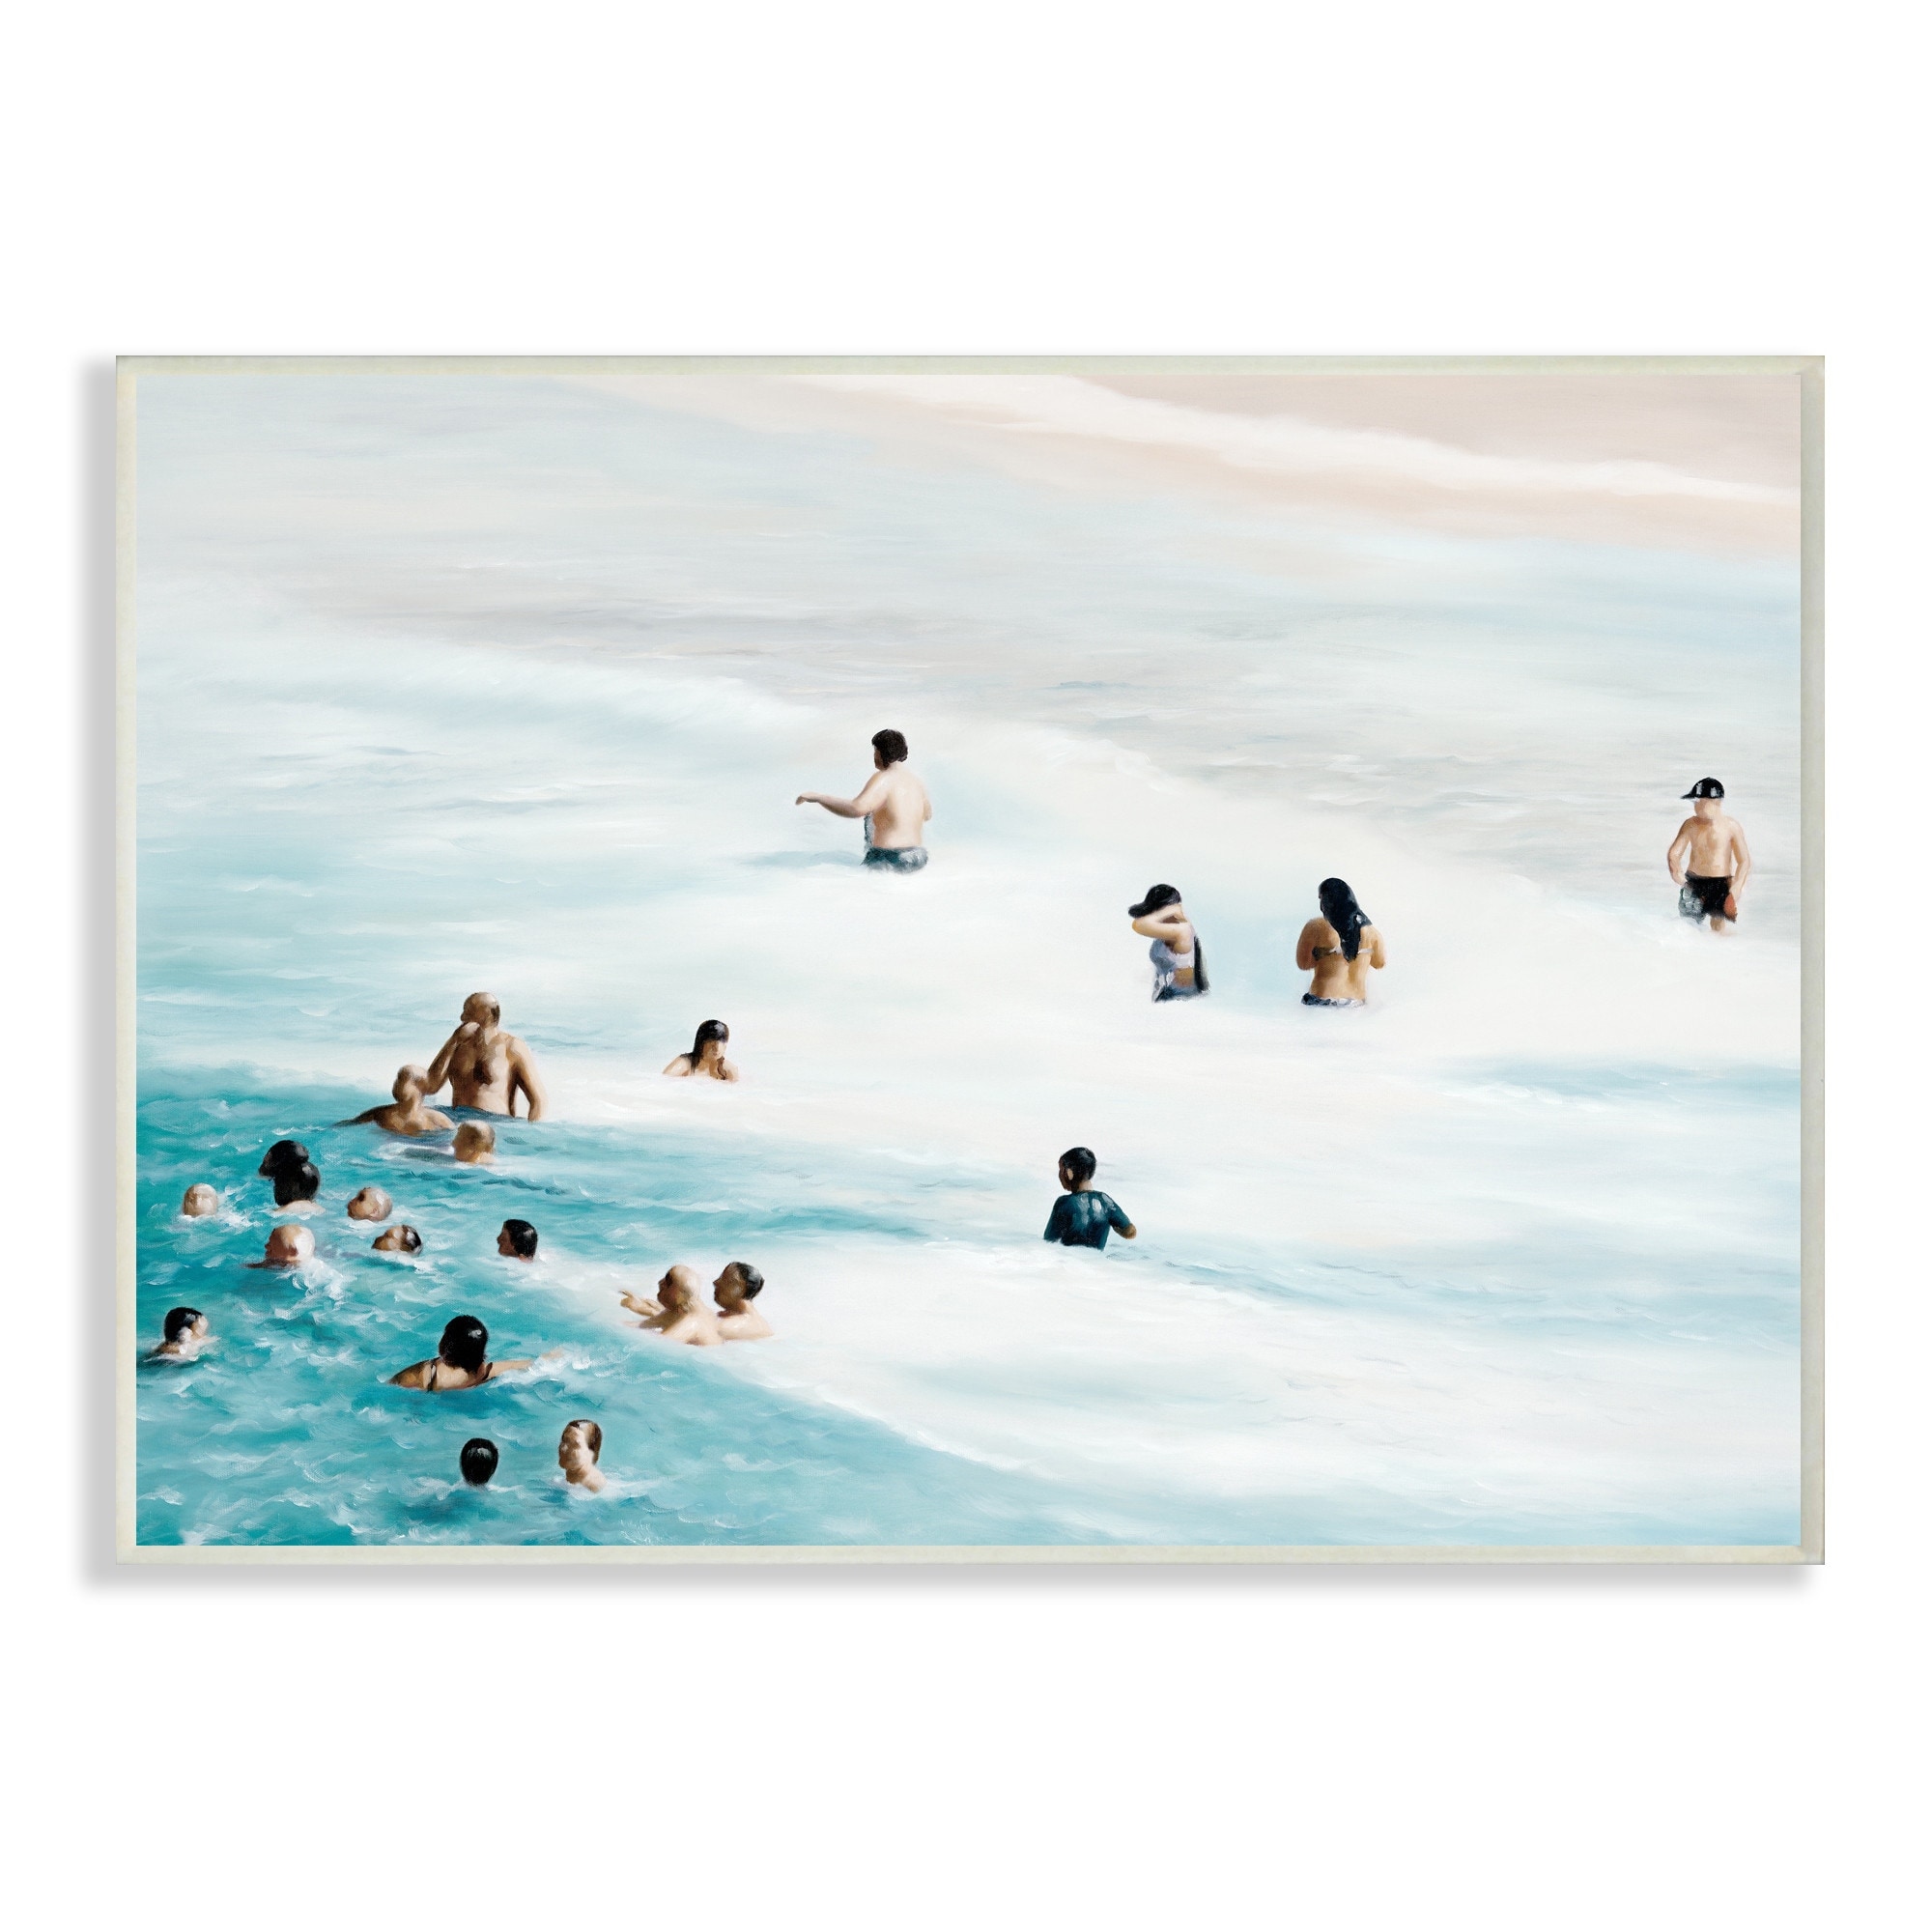 Stupell Industries Pool Floats Swimming Summer Beach Painting Framed Wall Art by Grace Popp, Size: 12 x 12